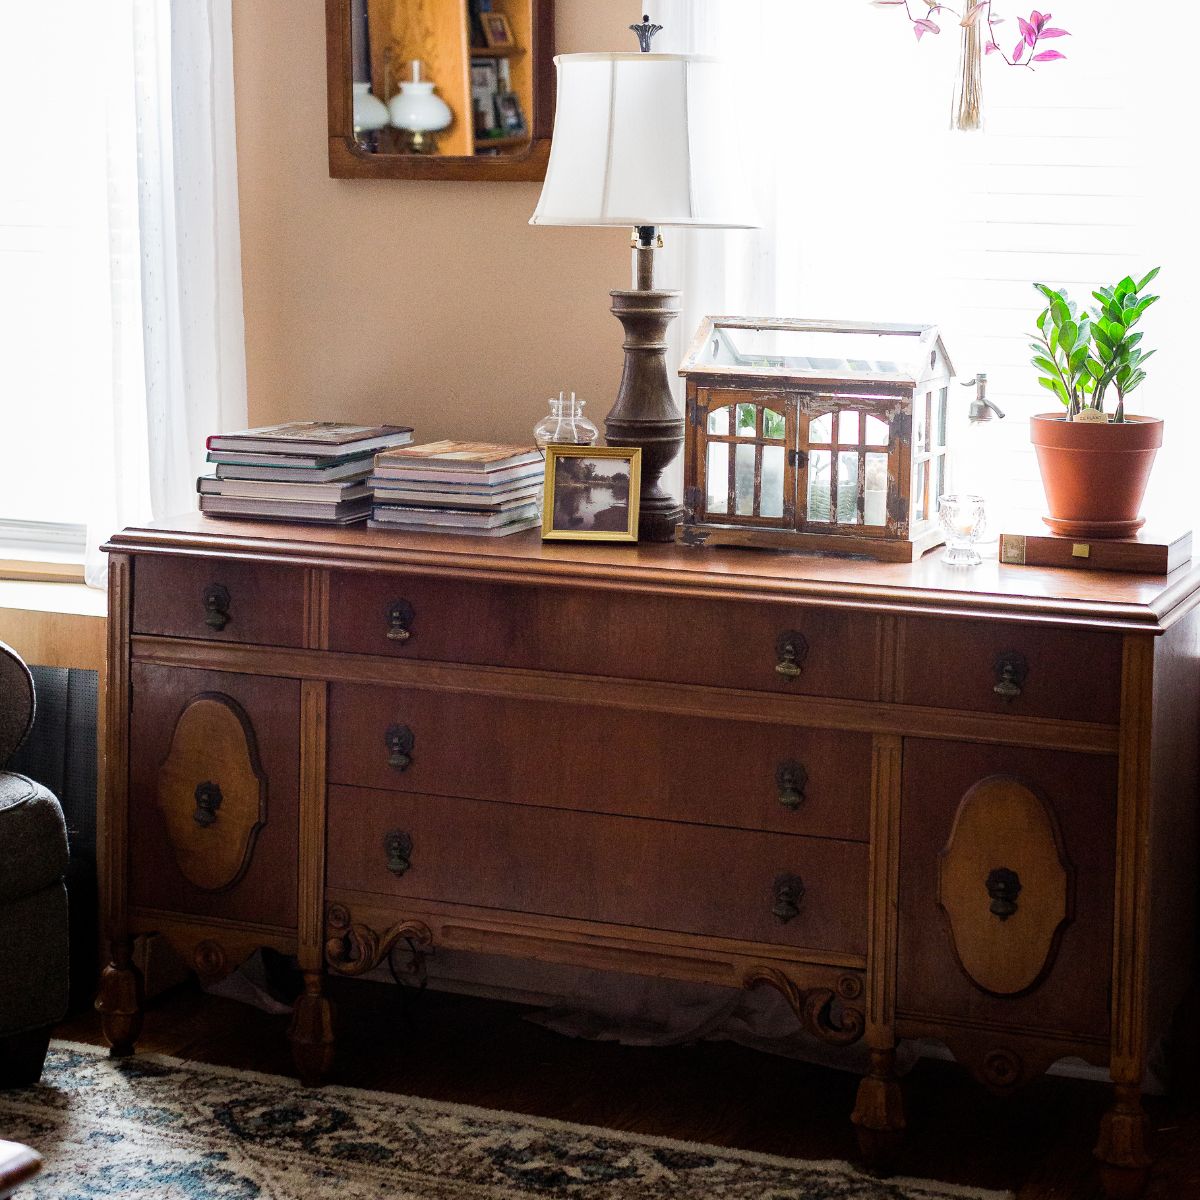 5 Uses for an Antique Sideboard